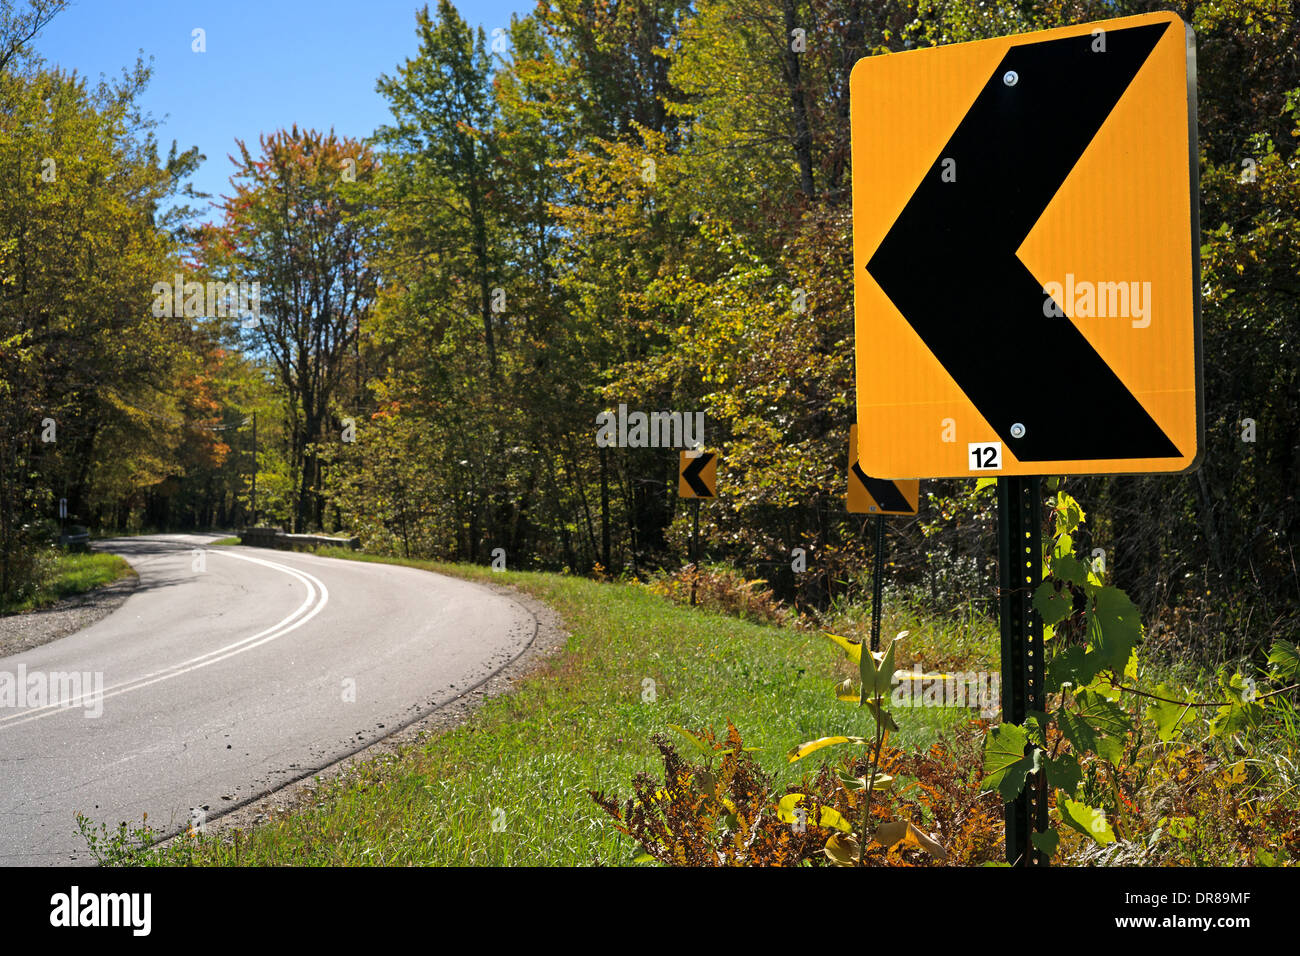 A distinct yellow and black road curve ahead sign in the foreground with a road curving through a forest in the background. Stock Photo